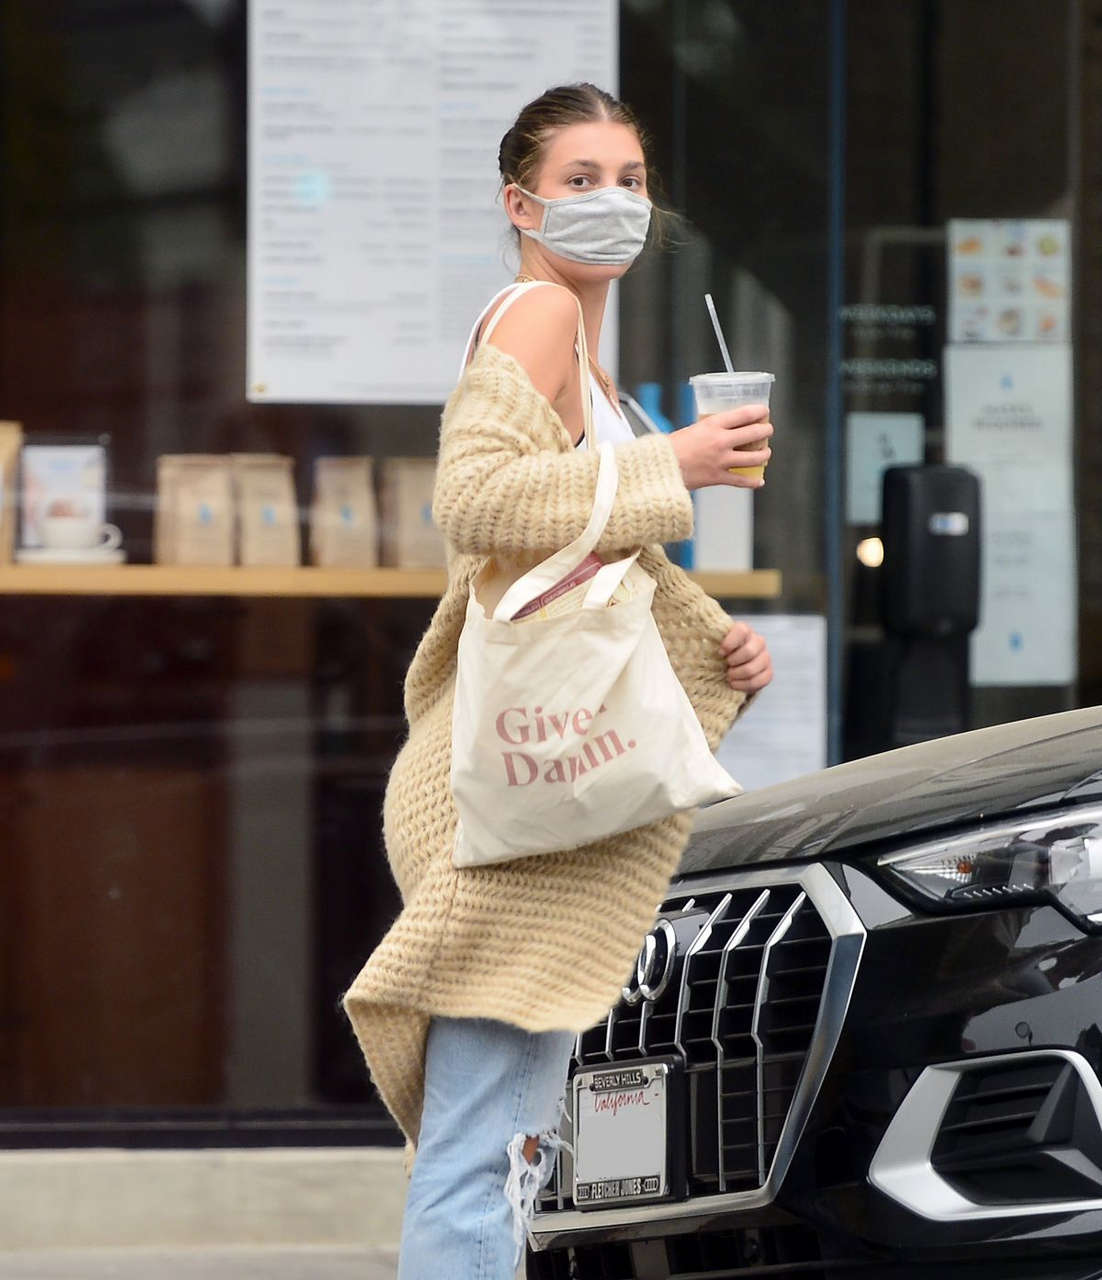 Camila Morrone Ripped Denim Out With Her Dog Los Angeles